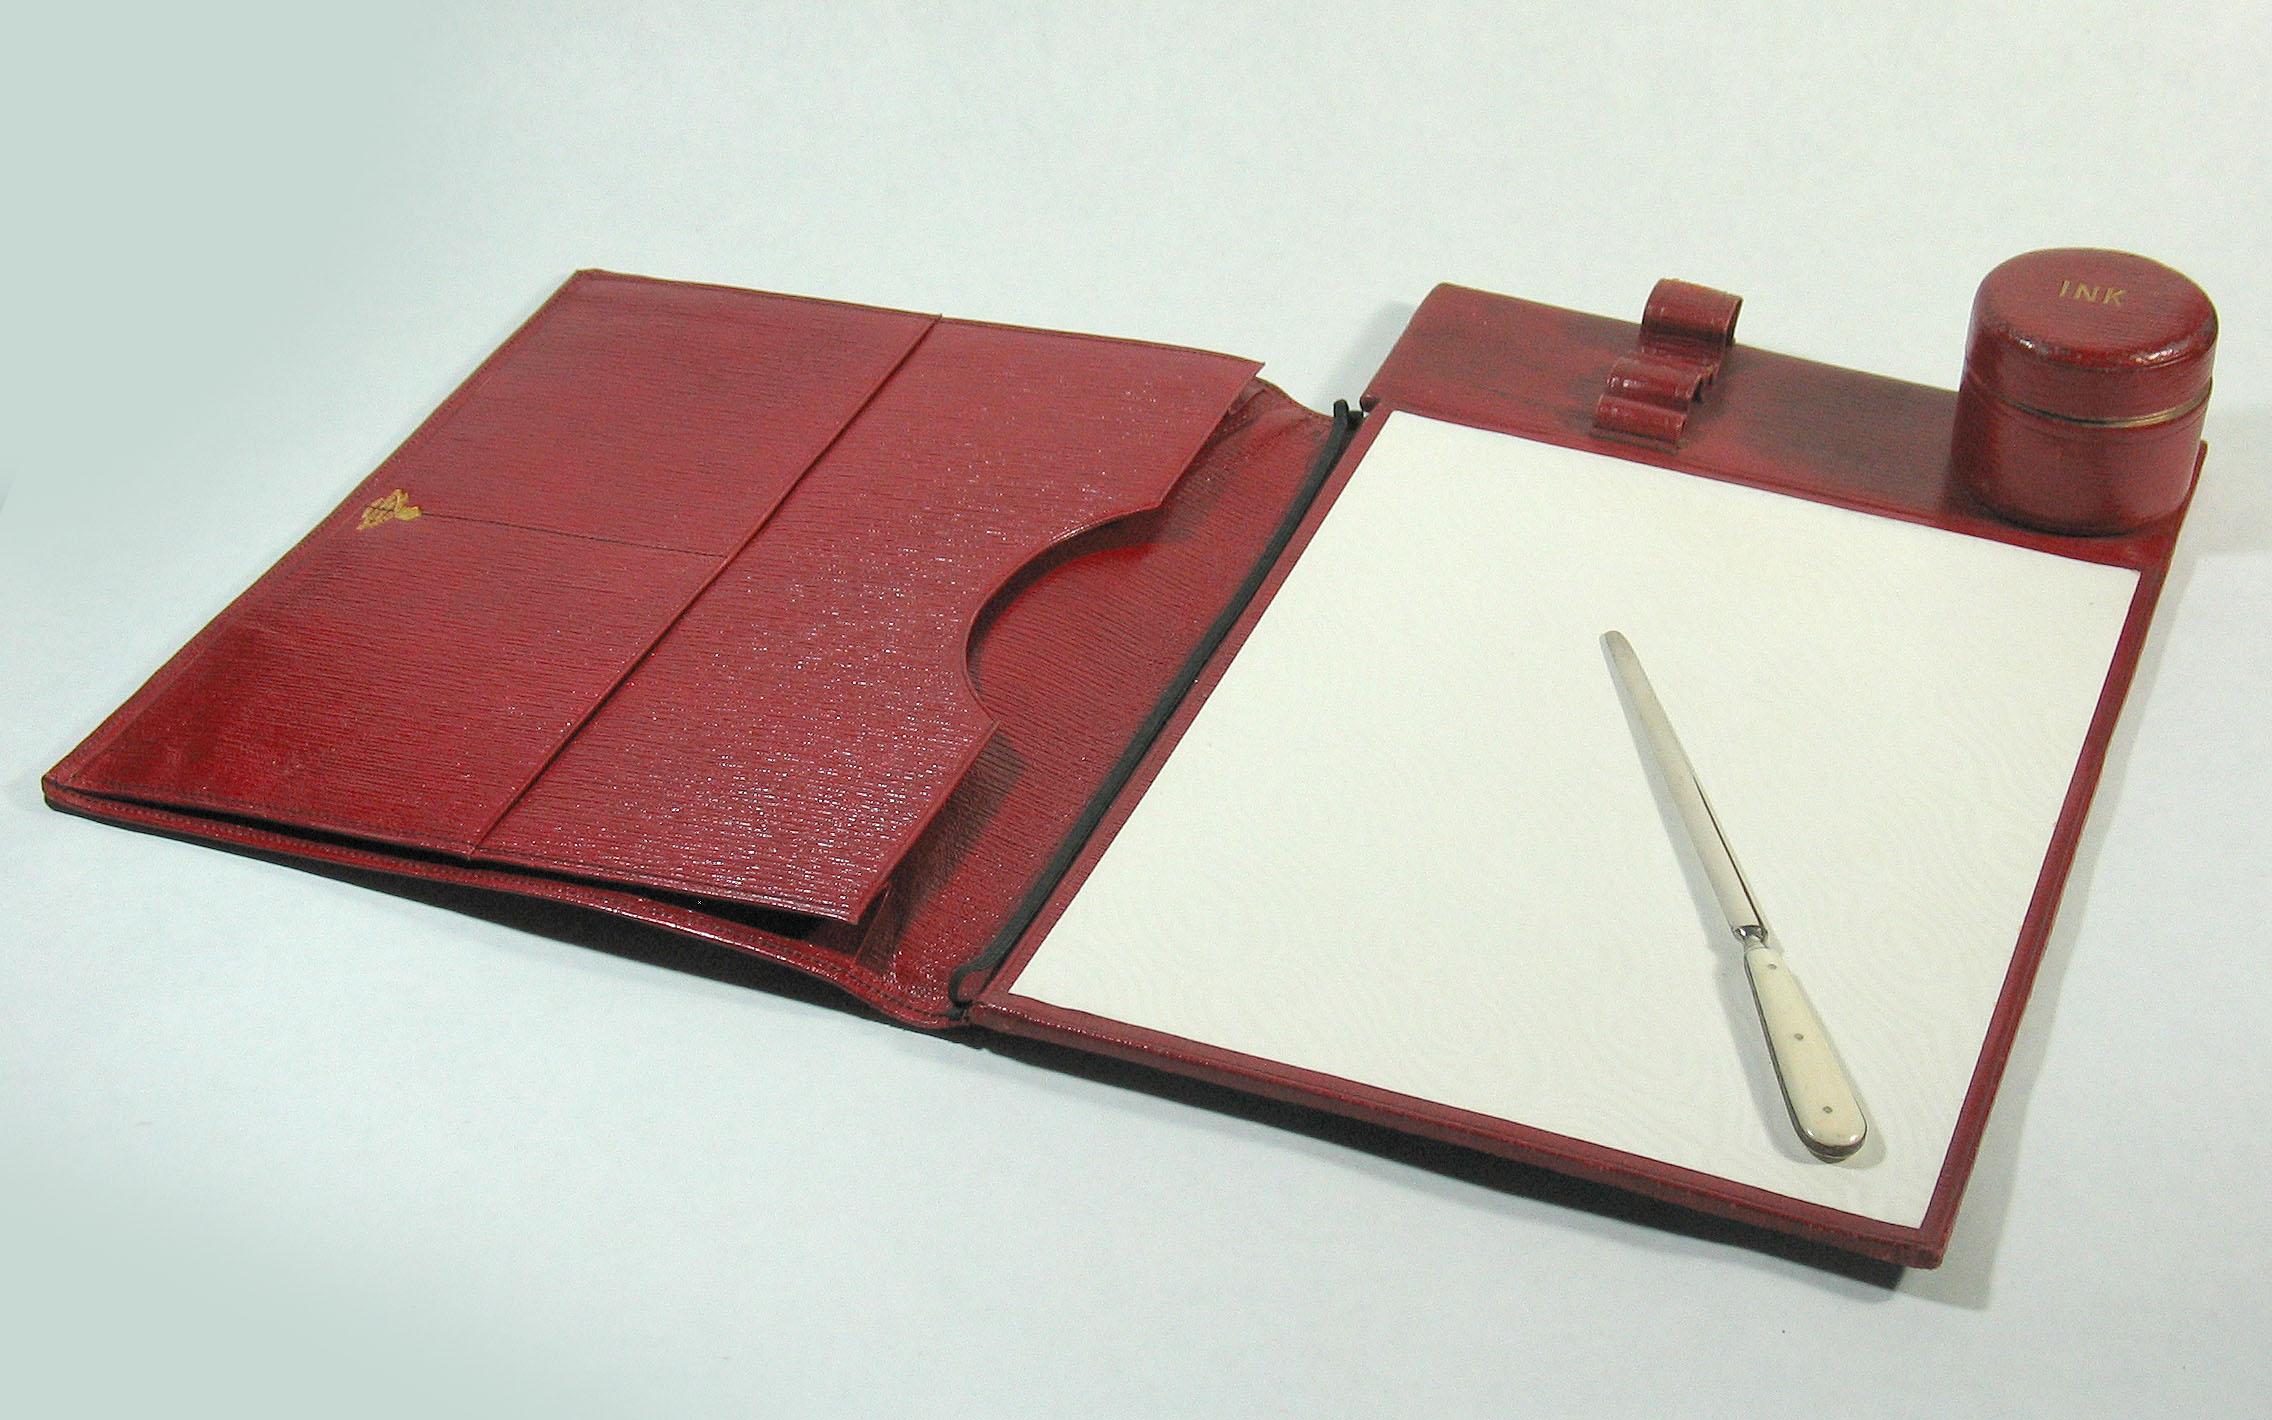 Hand-Crafted Antique Victorian Red Morrocan Leather Desk or Travelling Blotter with Inkwell